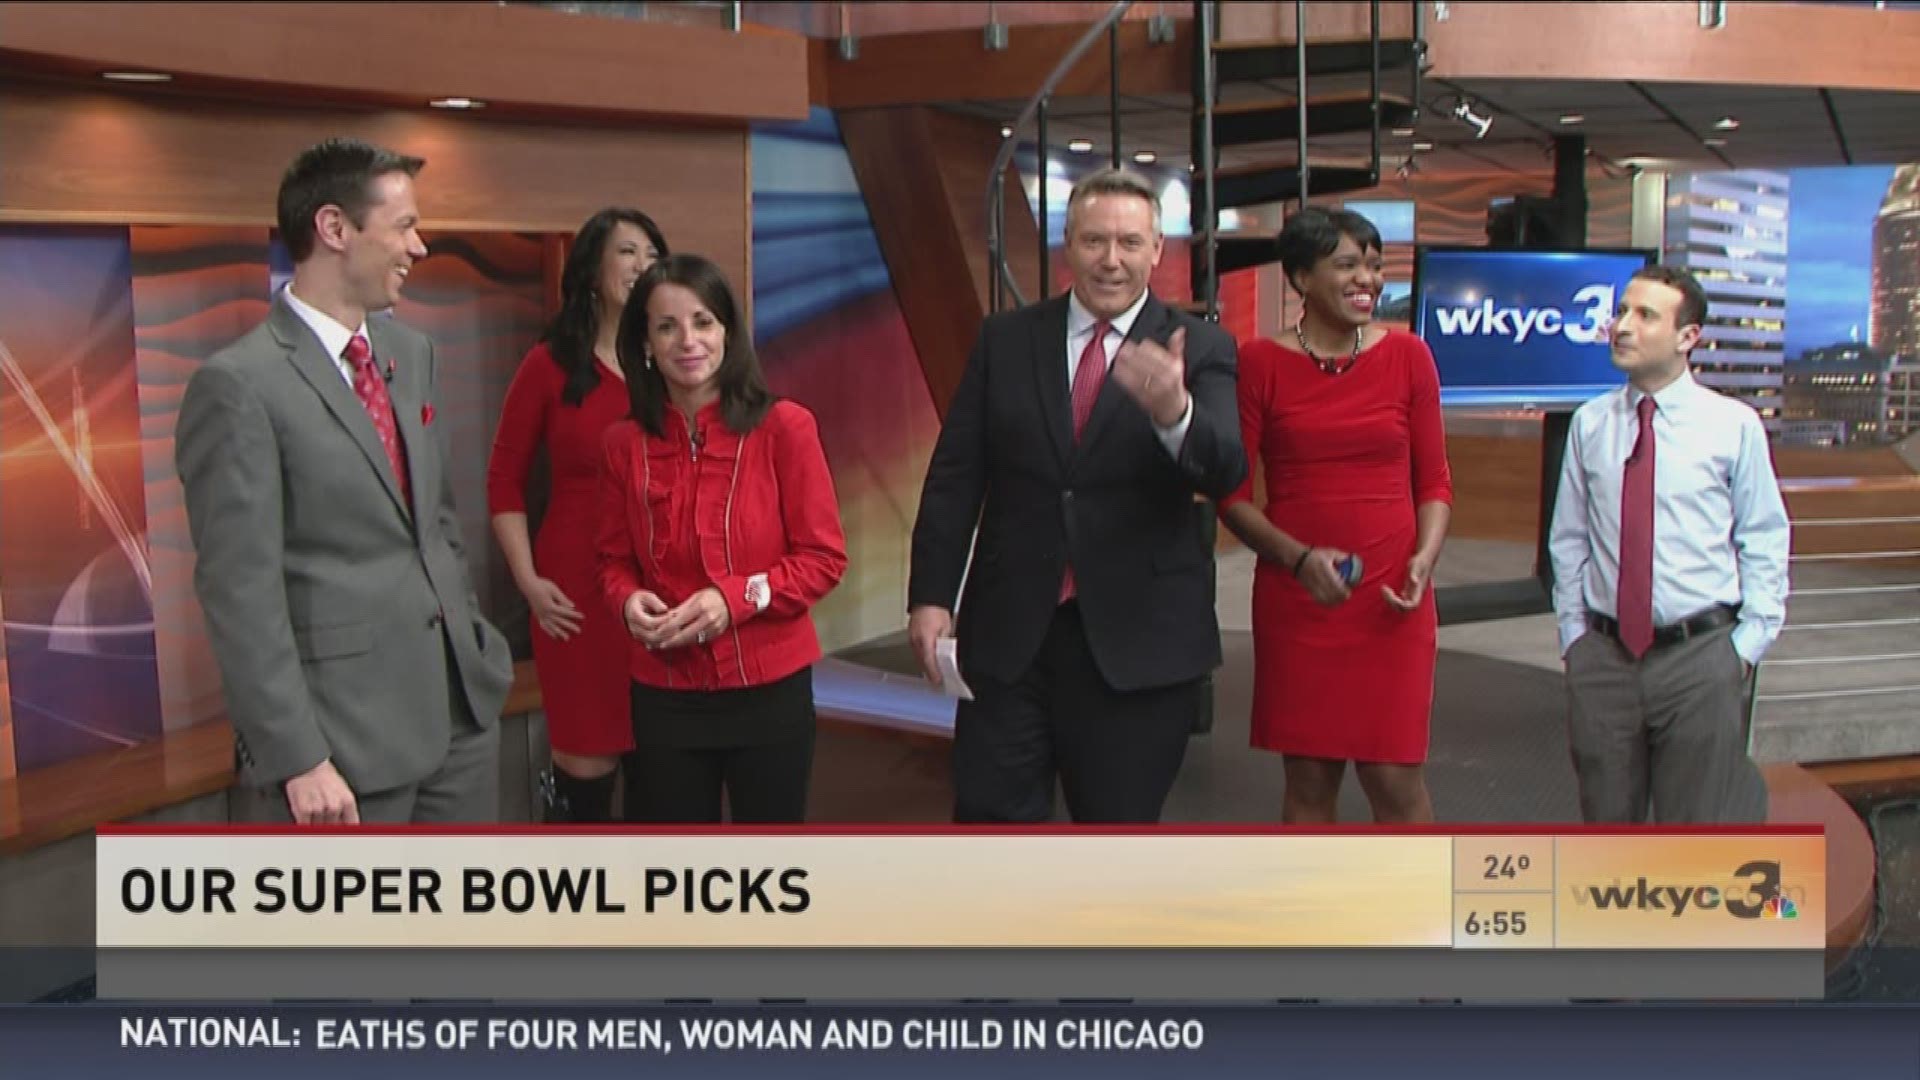 Feb. 5, 2016: Who will win Super Bowl 50? See who each member of the WKYC morning team has picked to win Sunday's big game between the Broncos and Panthers.